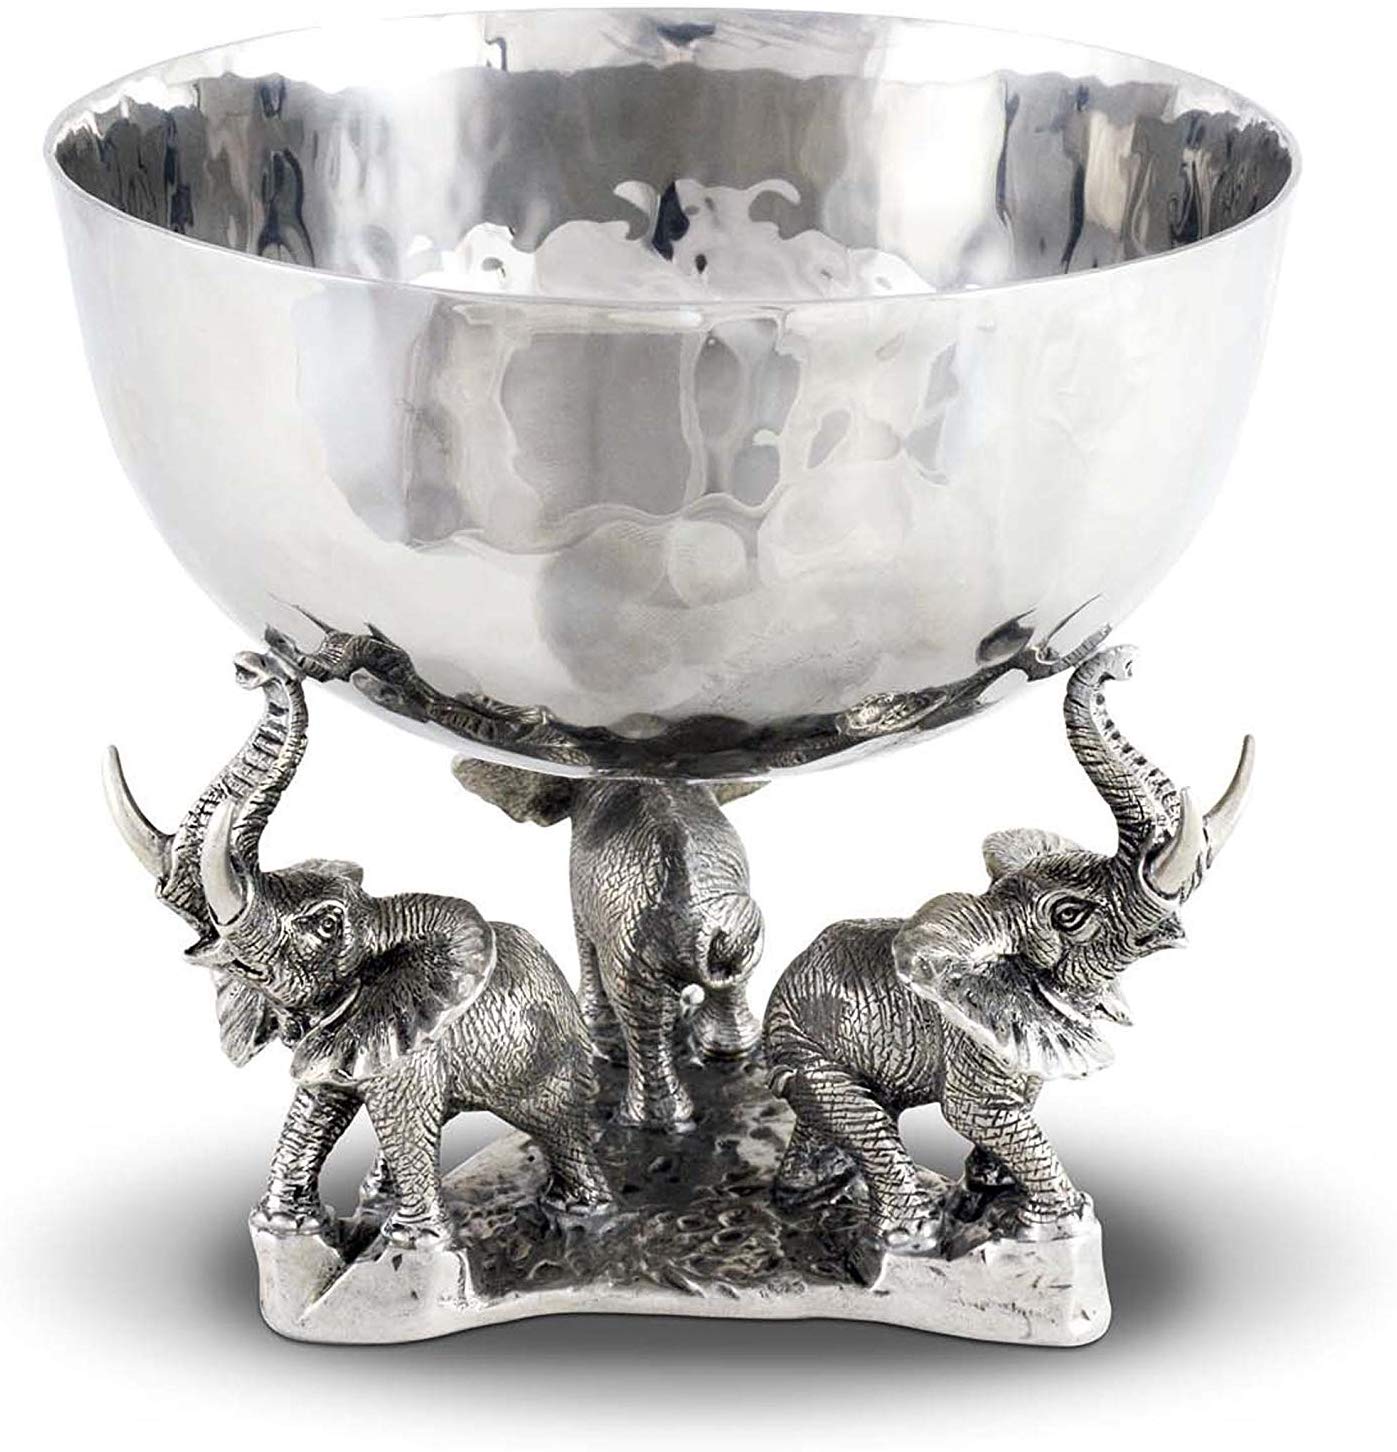 luxury-bowl-ice-tub-with-3-elephants-in-sterling-silver-pewter-stainless-steel